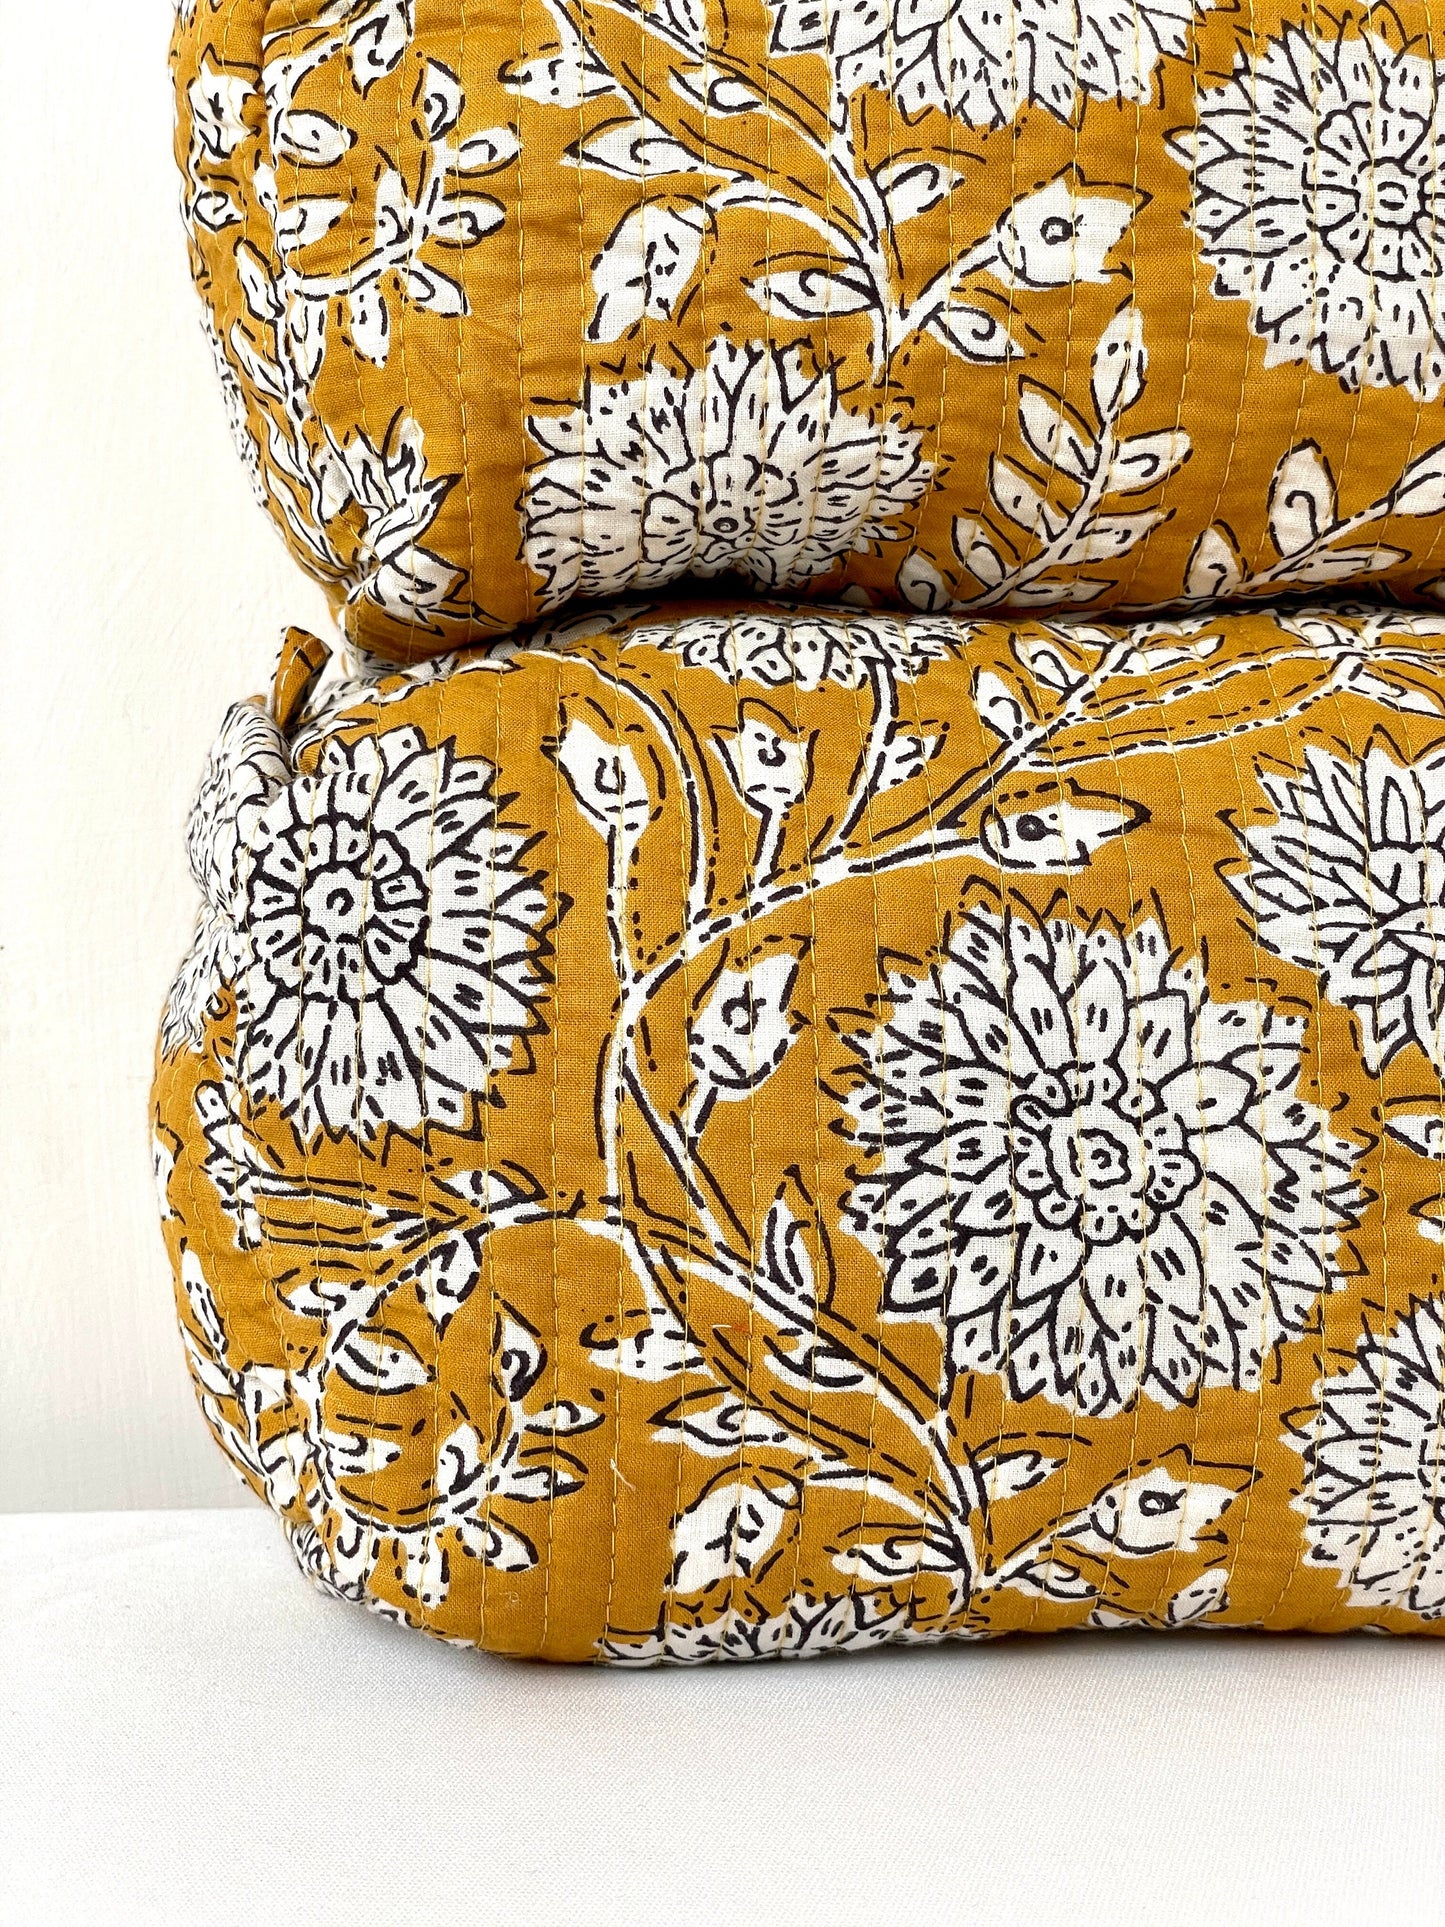 Cotton Quilted Toiletry Bag, Elegant Floral Hand Block Print Fabric Wash Bag, Pack of 3 Mustard & White Makeup Bag, Gift for She, Her